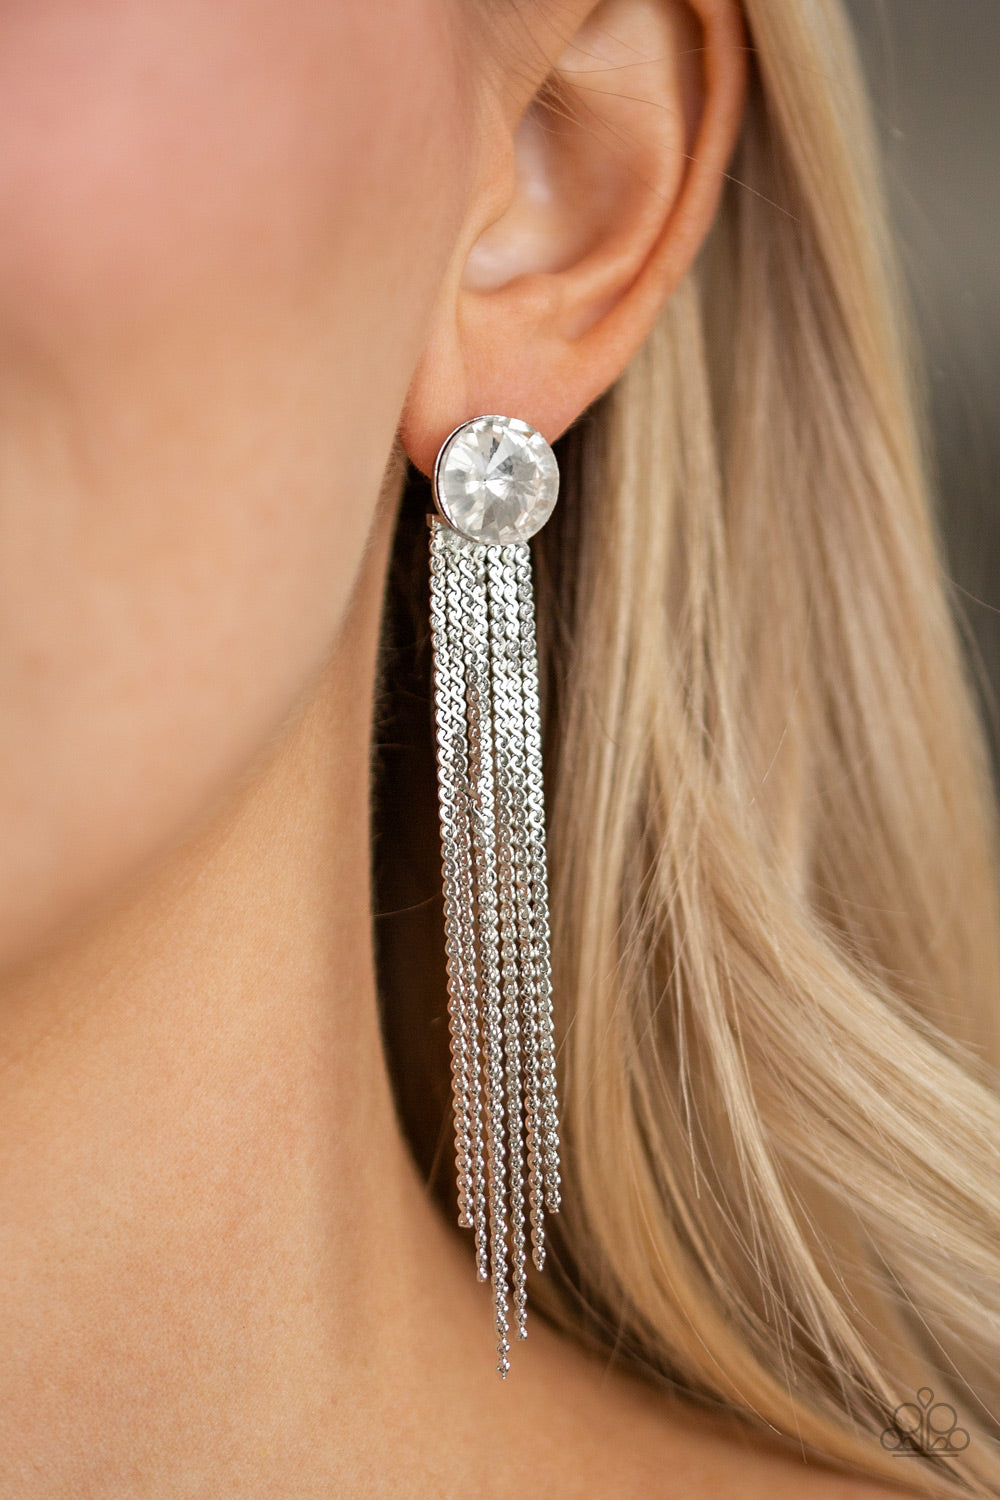 Paparazzi Level Up - White Gem - Silver Chains - Post Earrings - $5 Jewelry with Ashley Swint